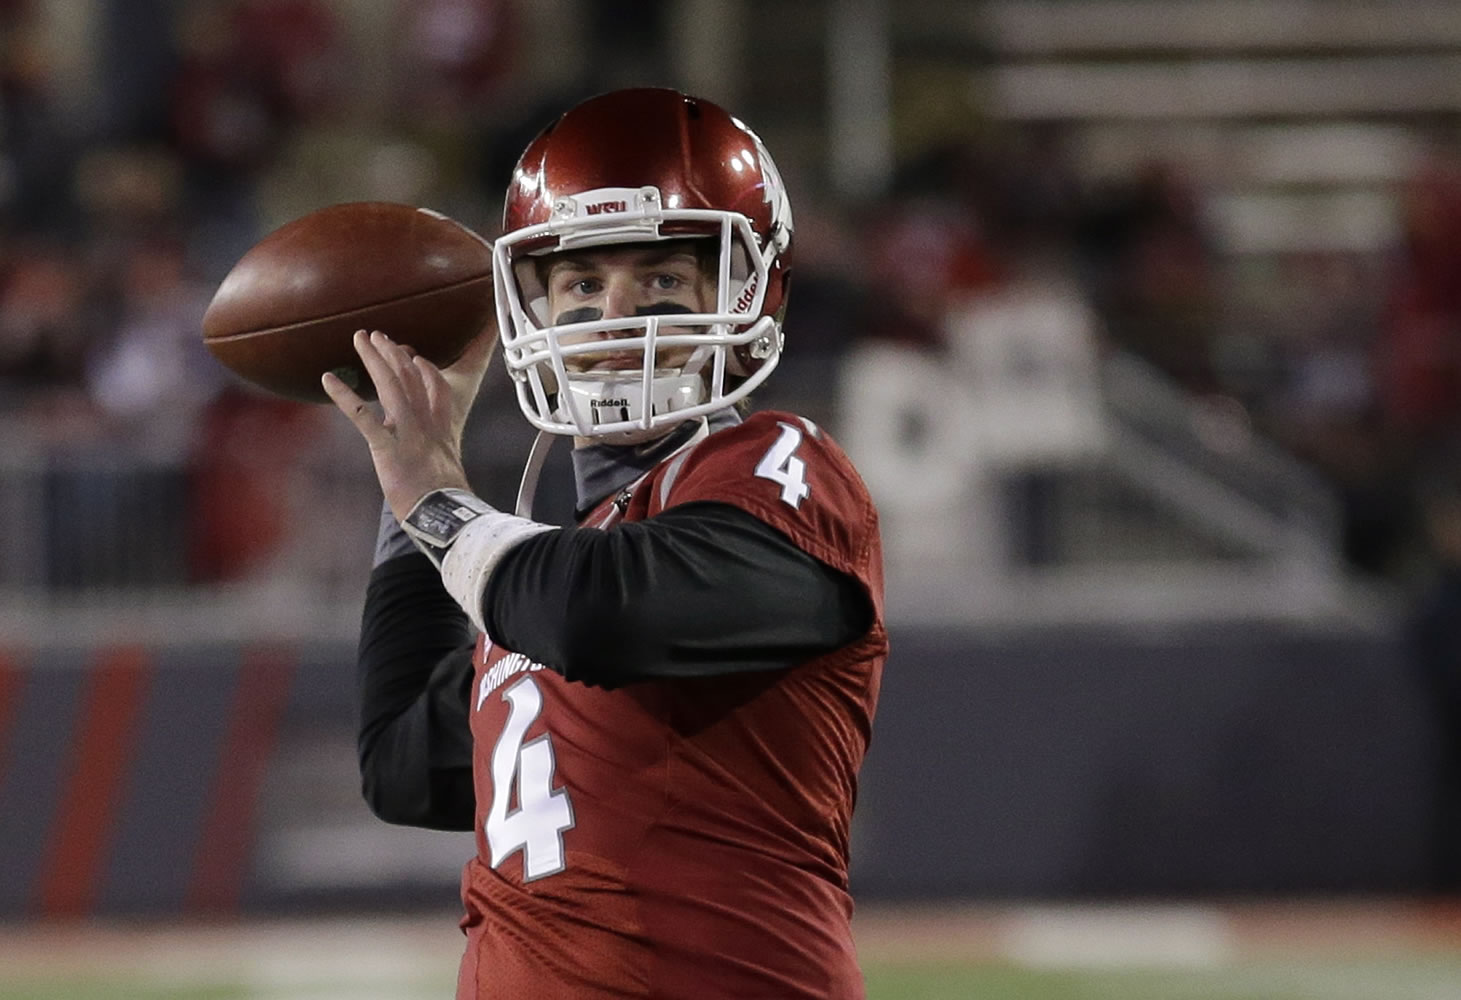 Washington State quarterback Luke Falk leads the Pacific-12 in passing yards and has surprising Washington State (4-2, 2-1) on track for a possible bowl game.(AP Photo/Ted S.